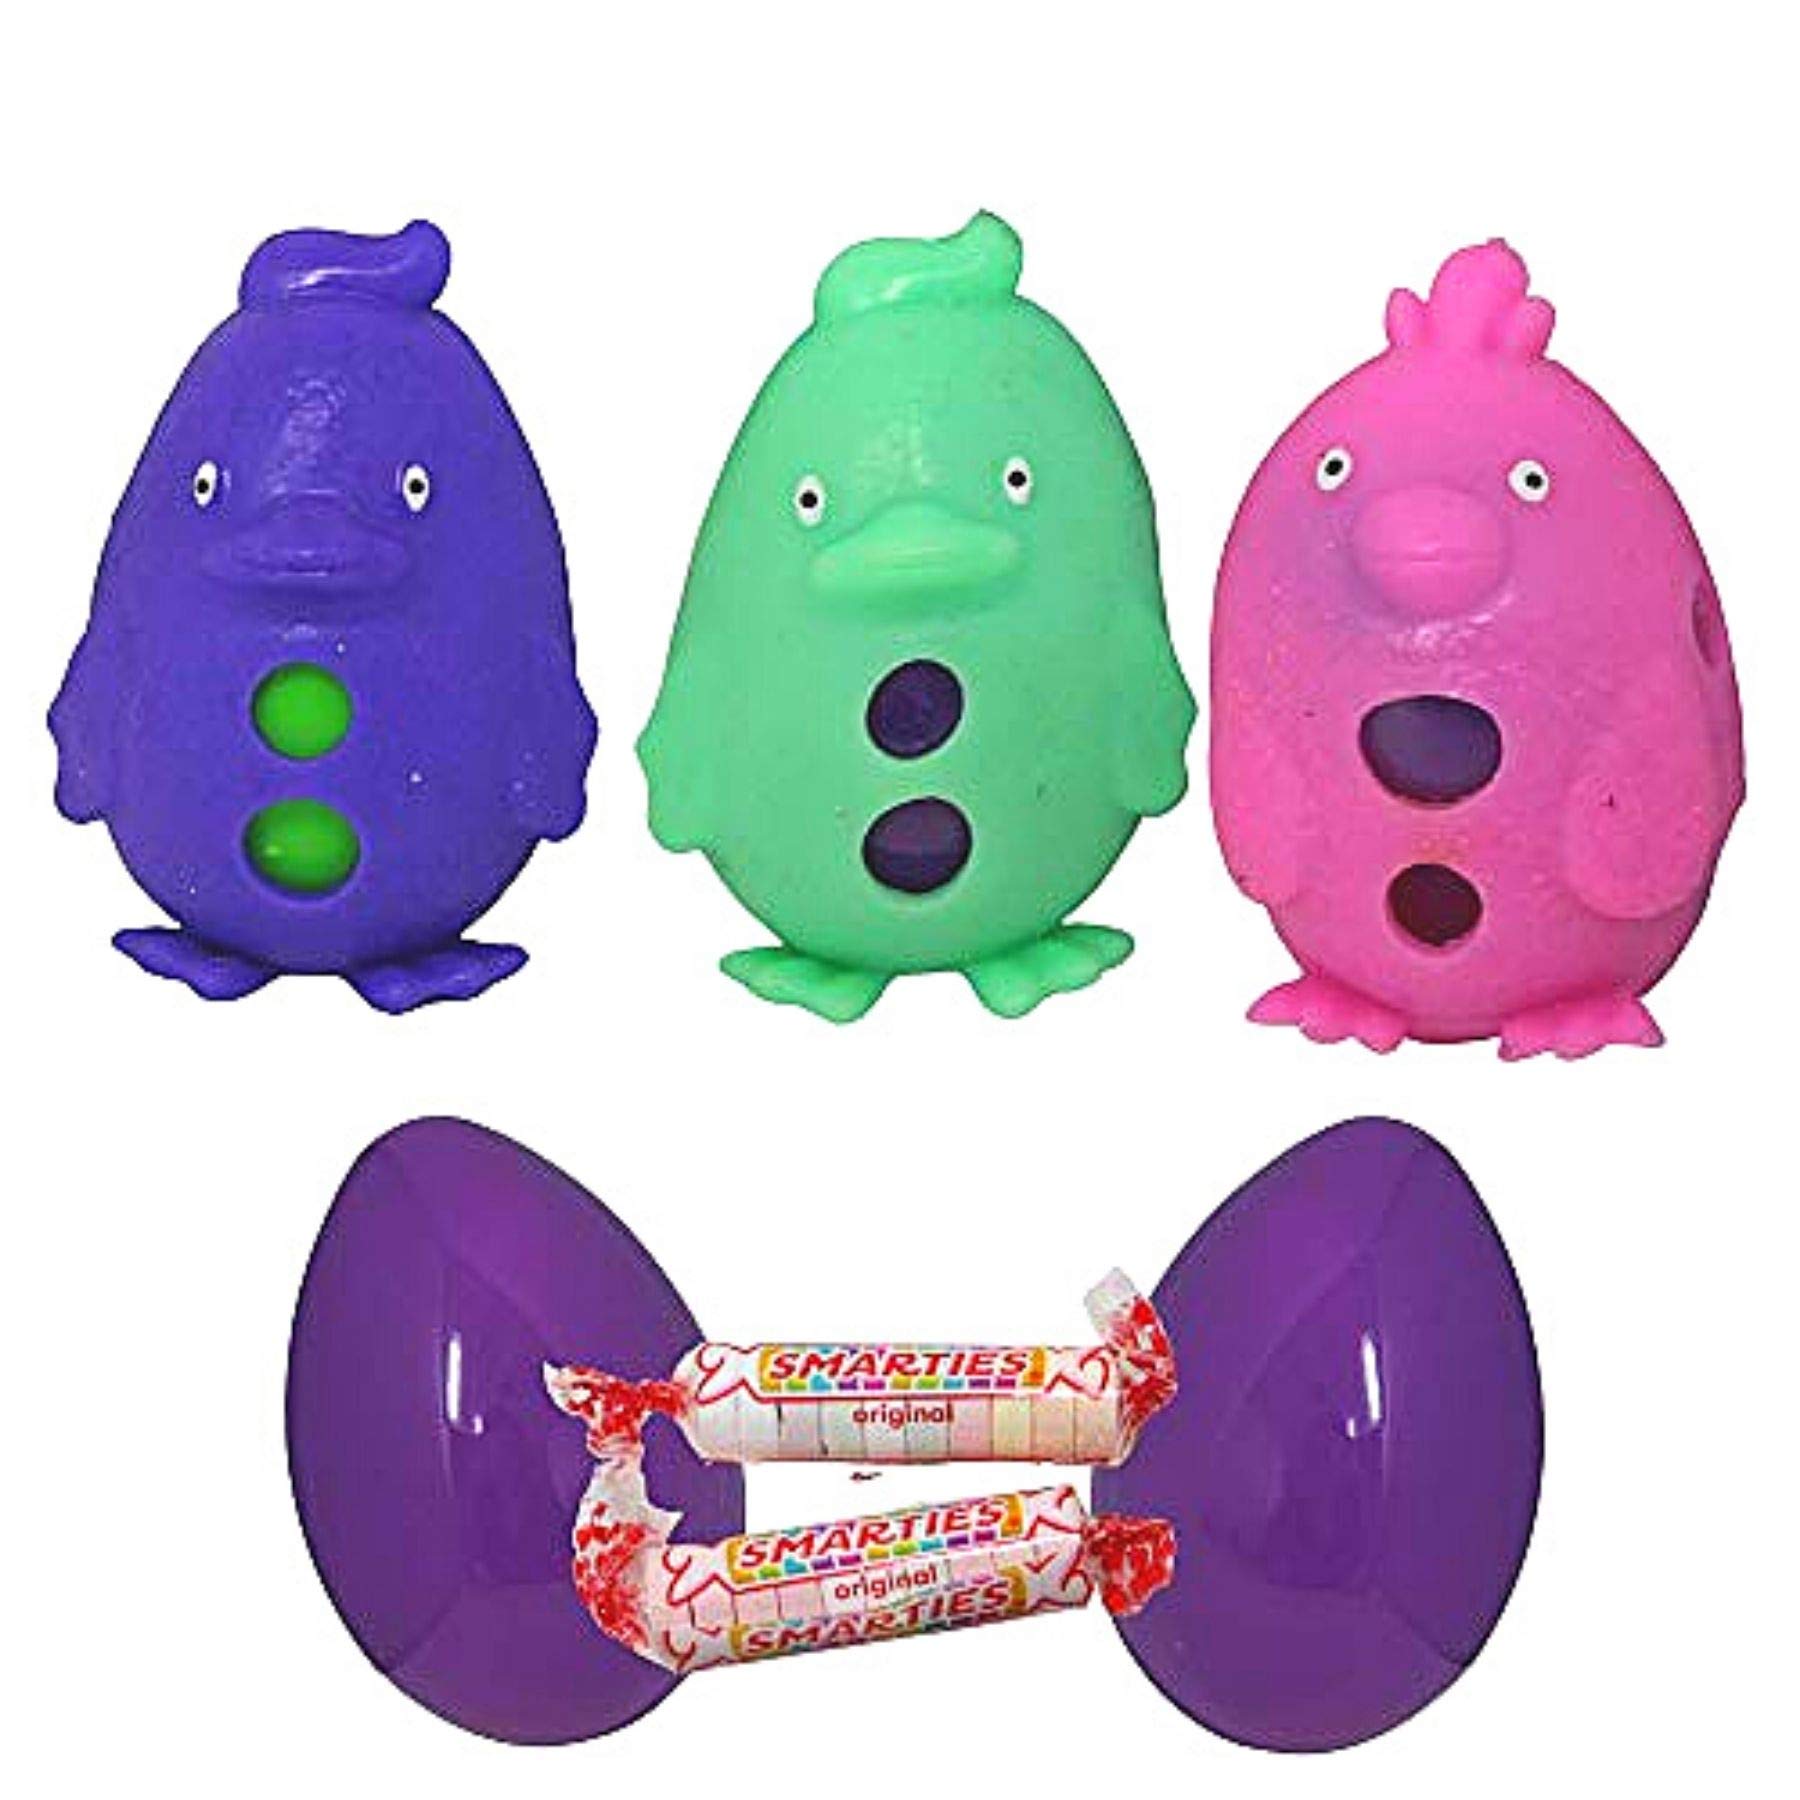 Smarties Candy Plastic Prefilled Easter Eggs, Animal Skinz Finger Puppet Egg Cover and Candies Ultimate Prize Winner, Pack of 3